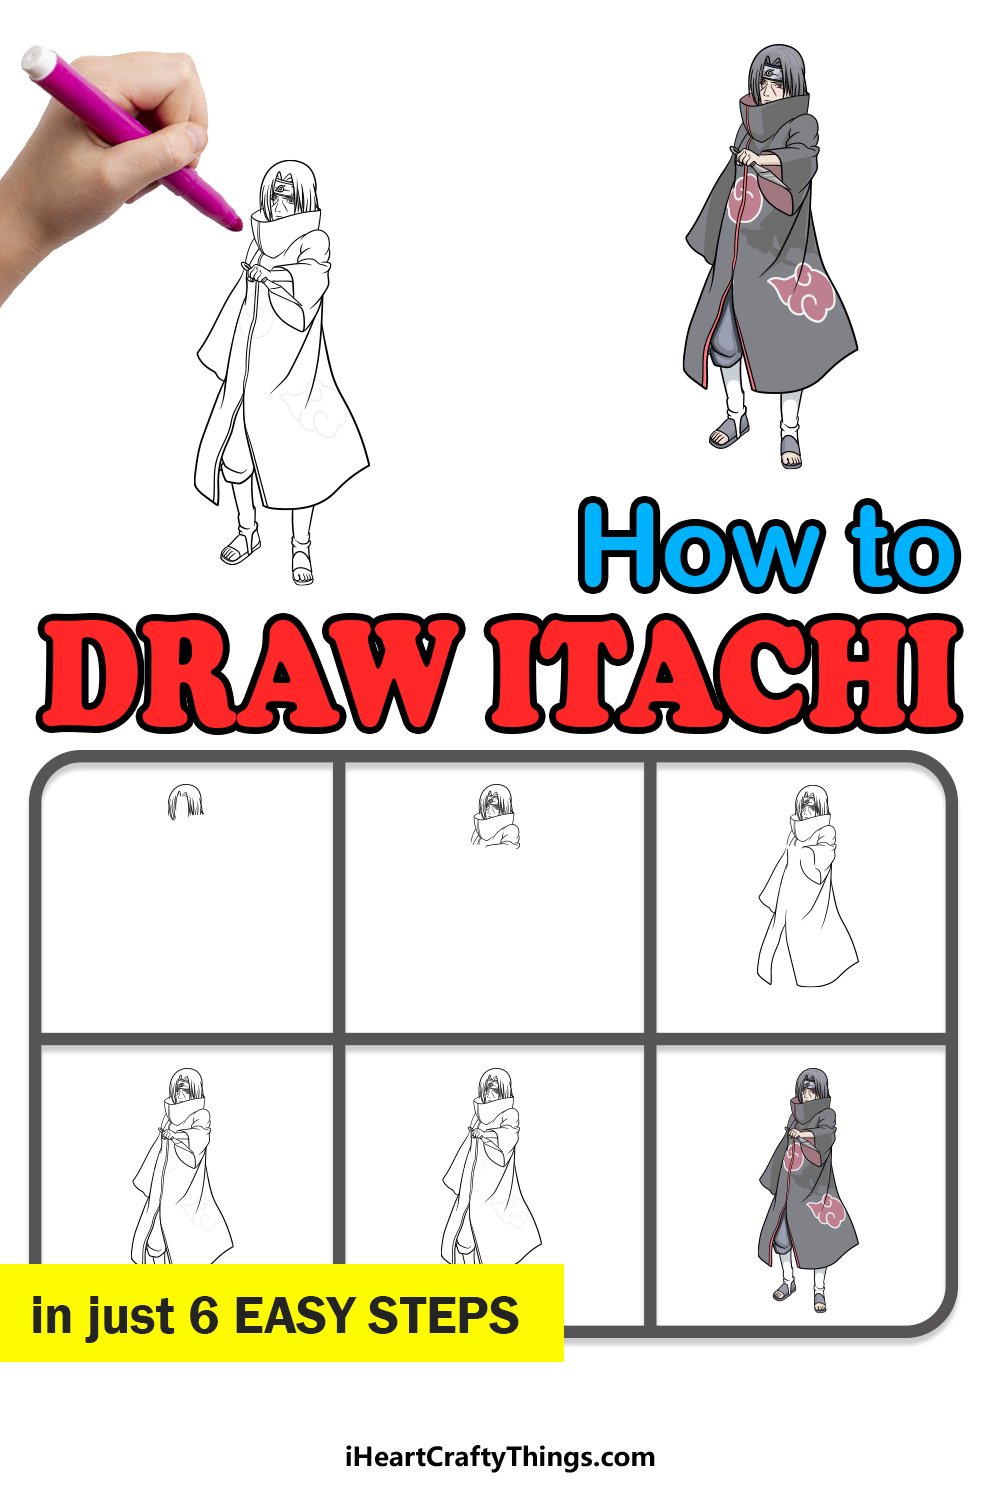 How to draw Itachi in 6 easy steps